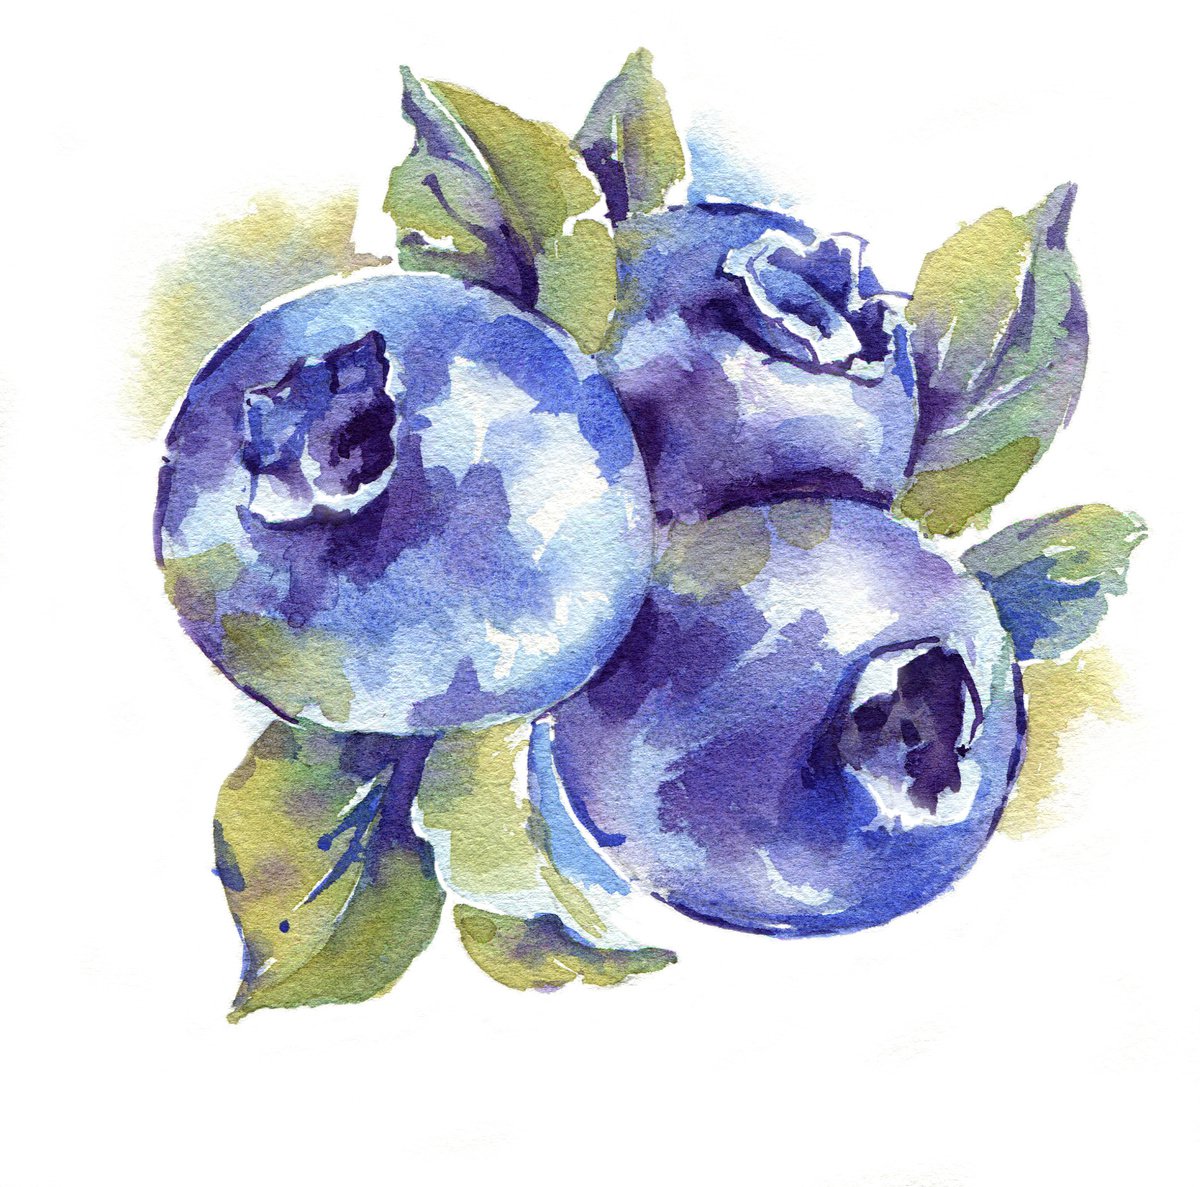 Blueberry from the series of watercolor illustrations Berries by Ksenia Selianko